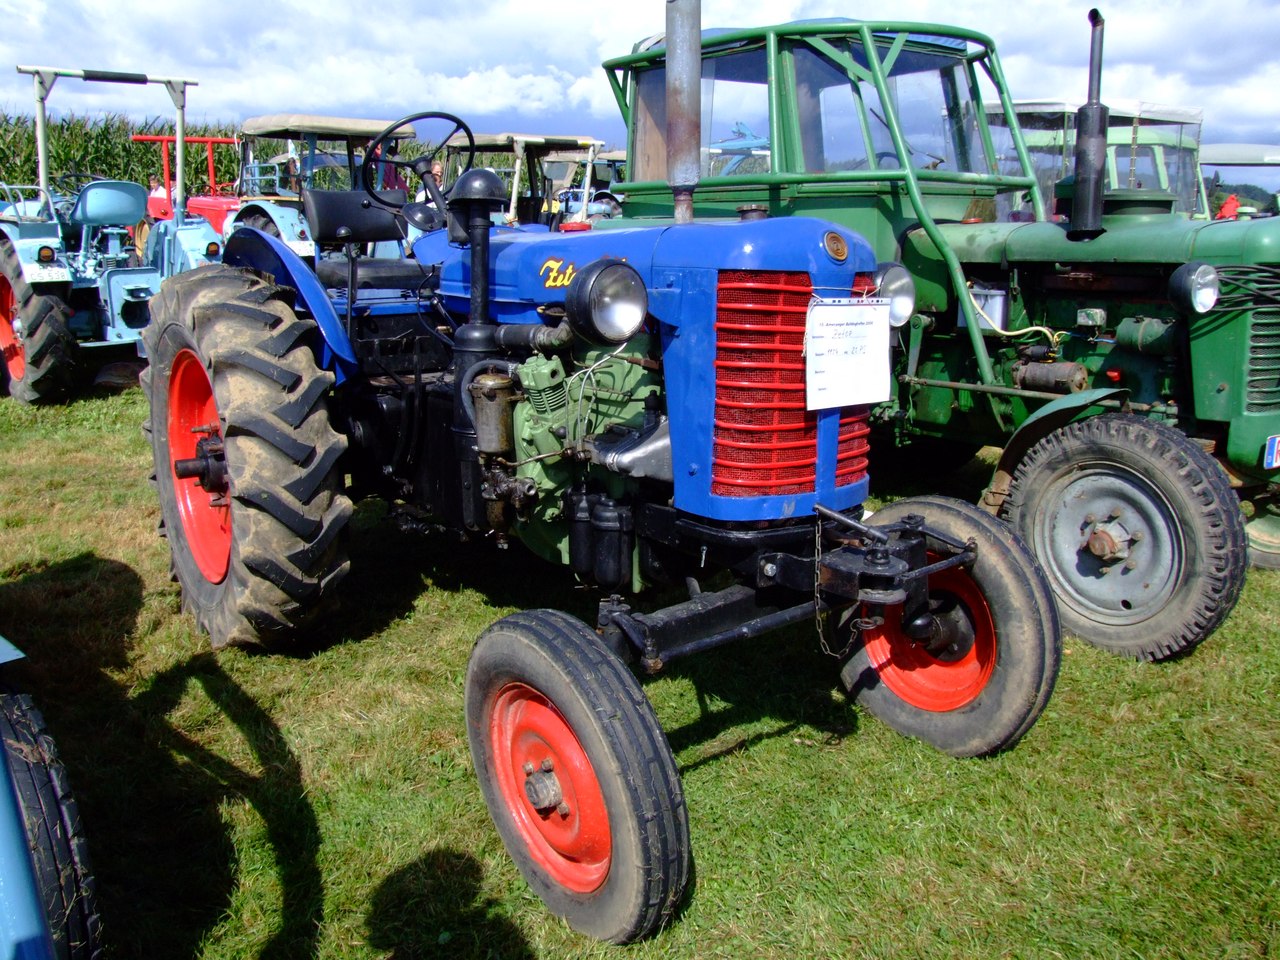 zetor 25 a 9 10 from 98 votes zetor 25 a 10 10 from 99 votes